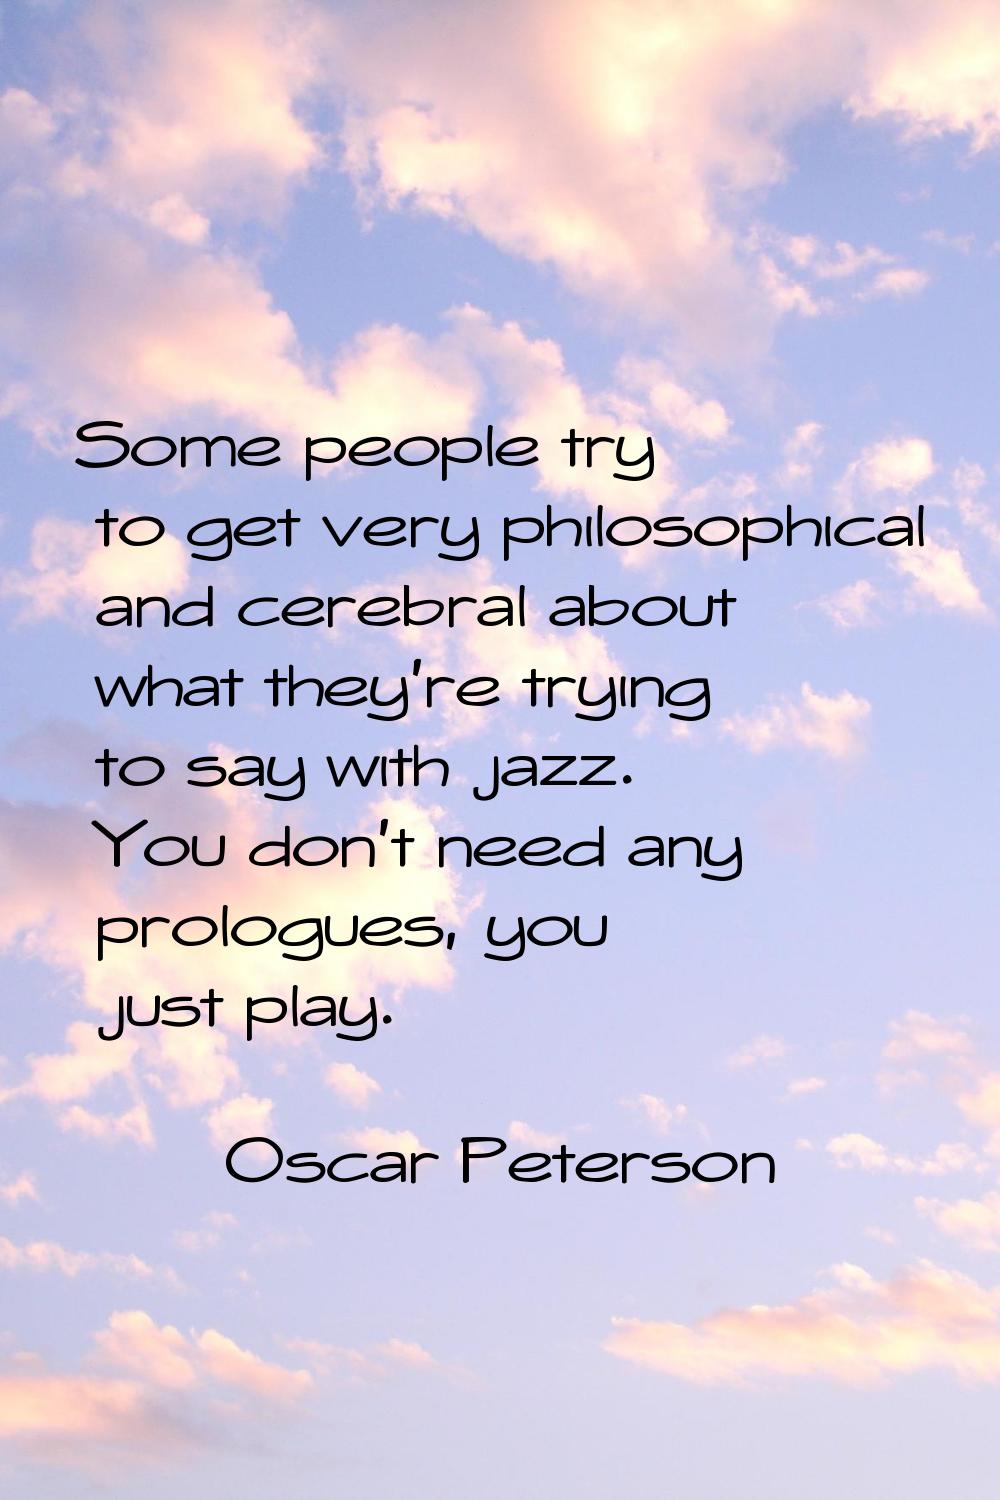 Some people try to get very philosophical and cerebral about what they're trying to say with jazz. 